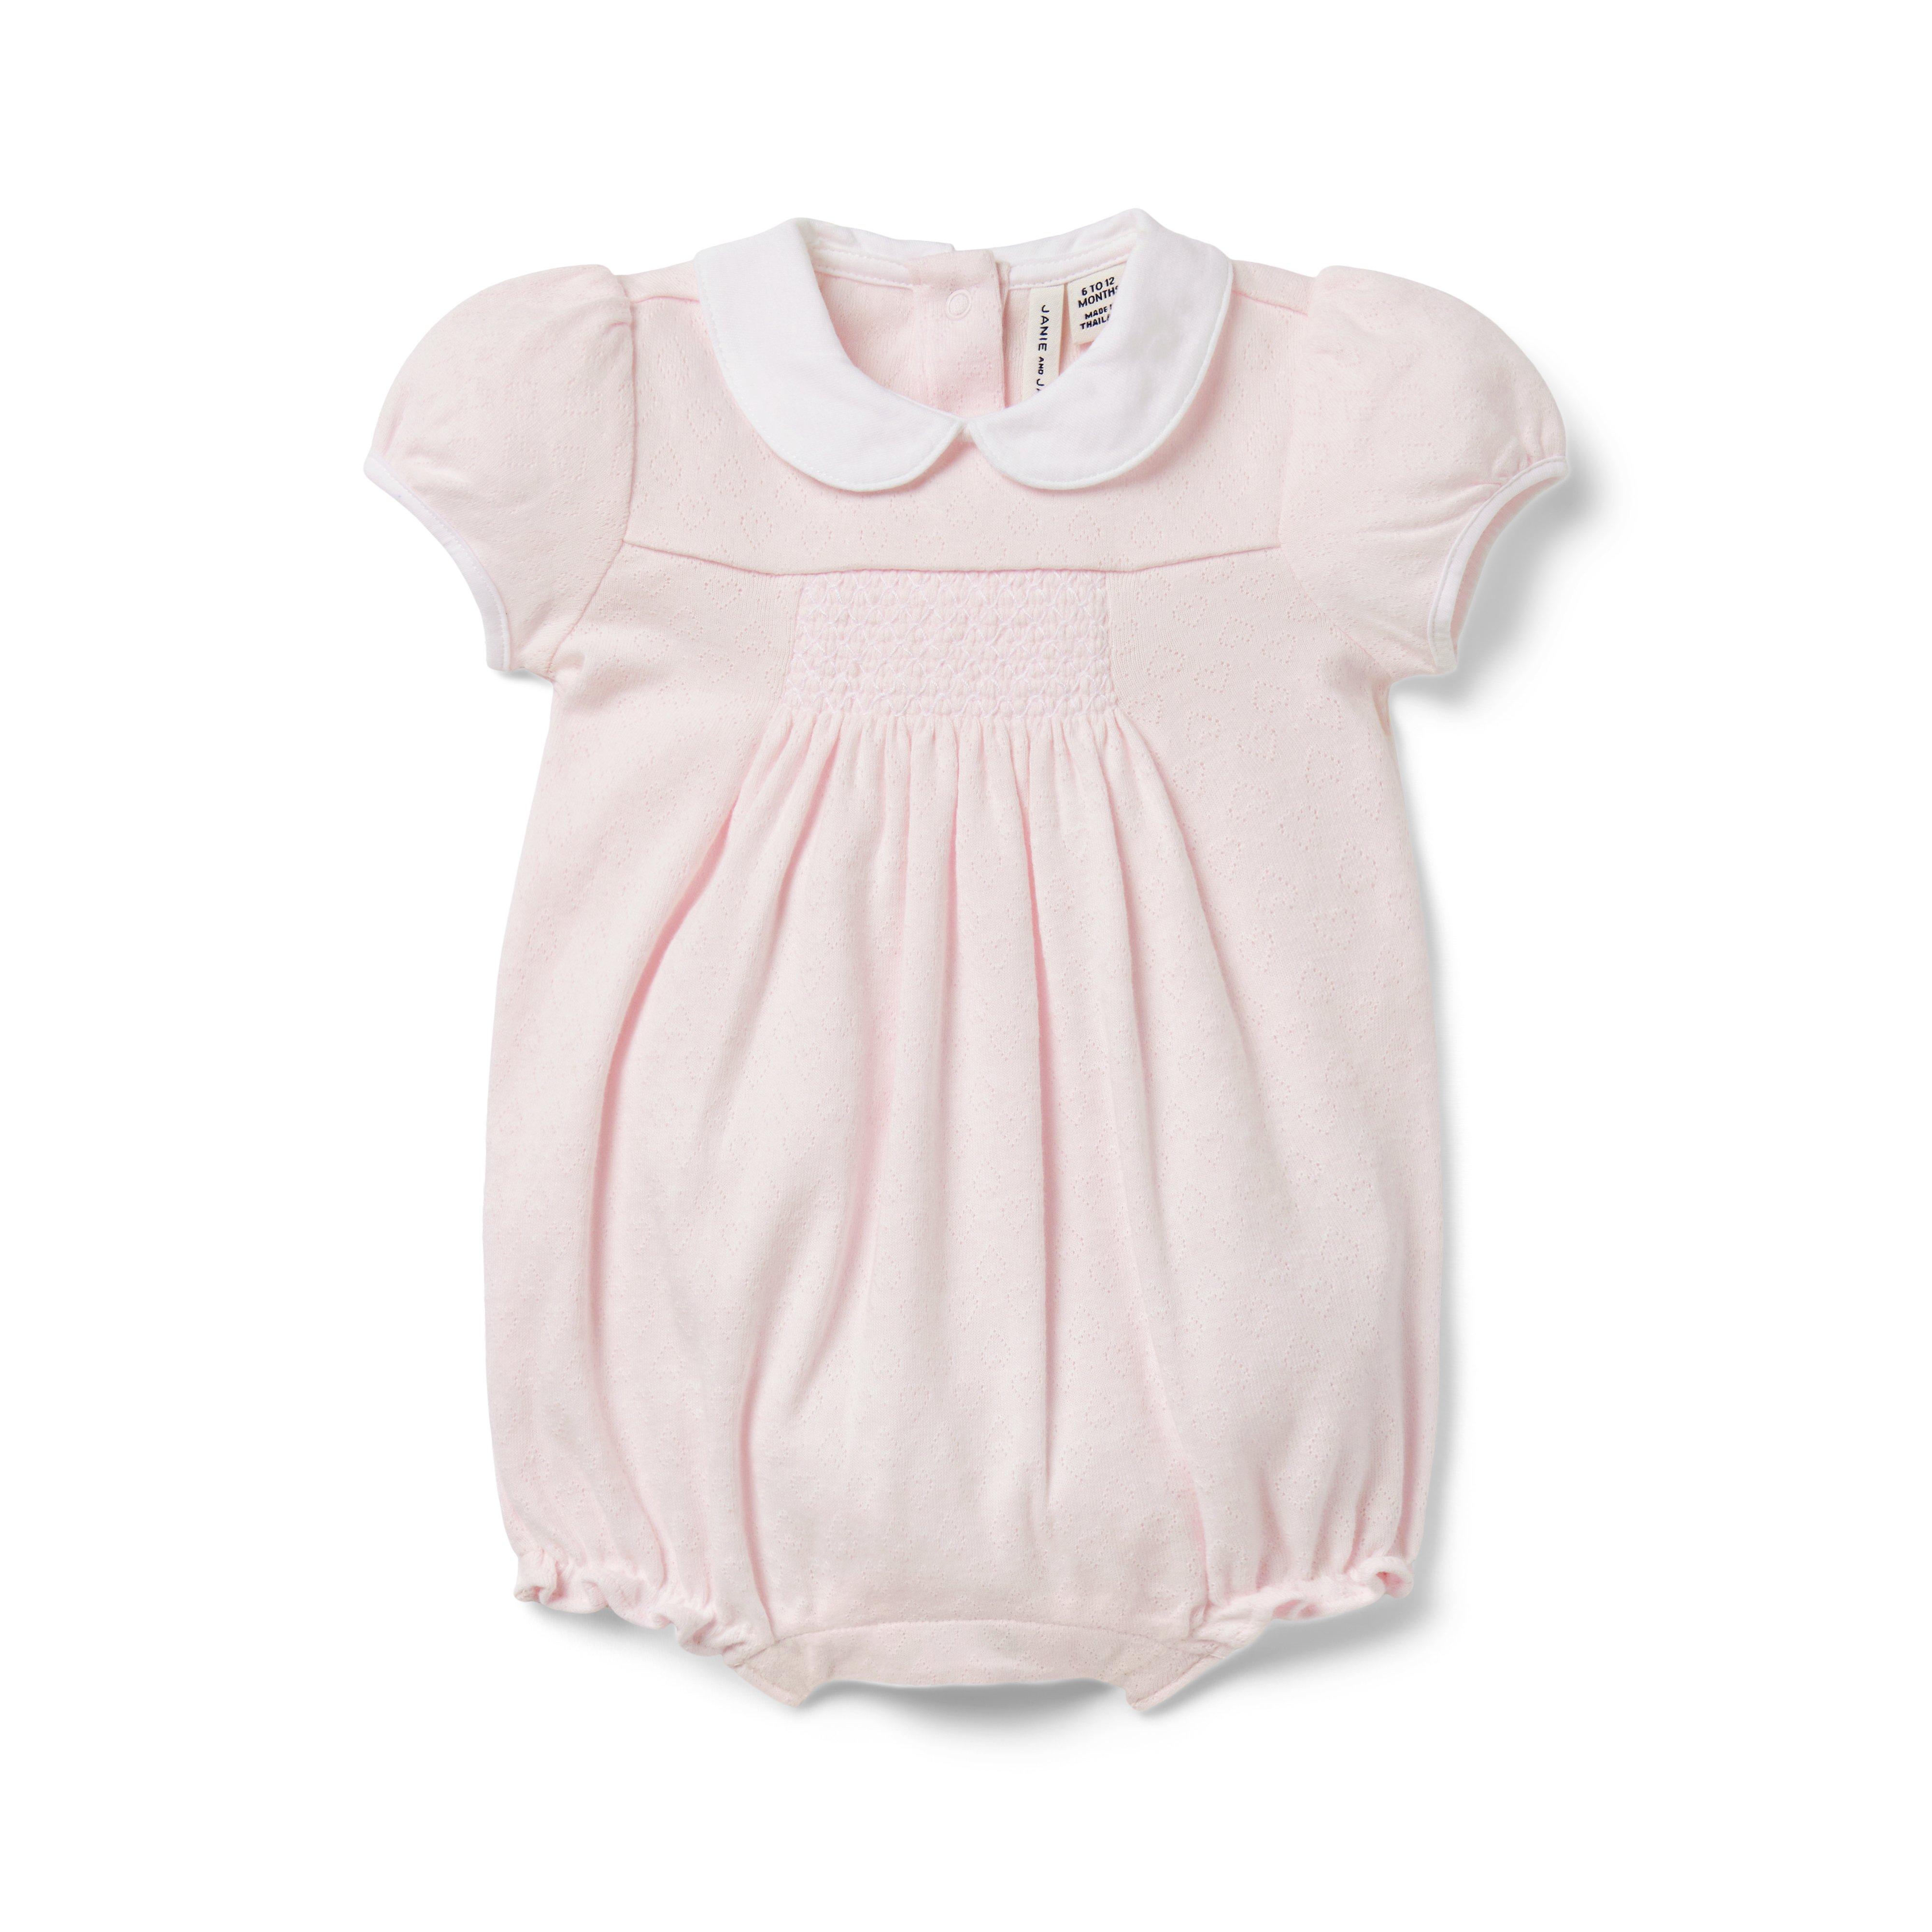 Baby Heart Pointelle Collared Romper